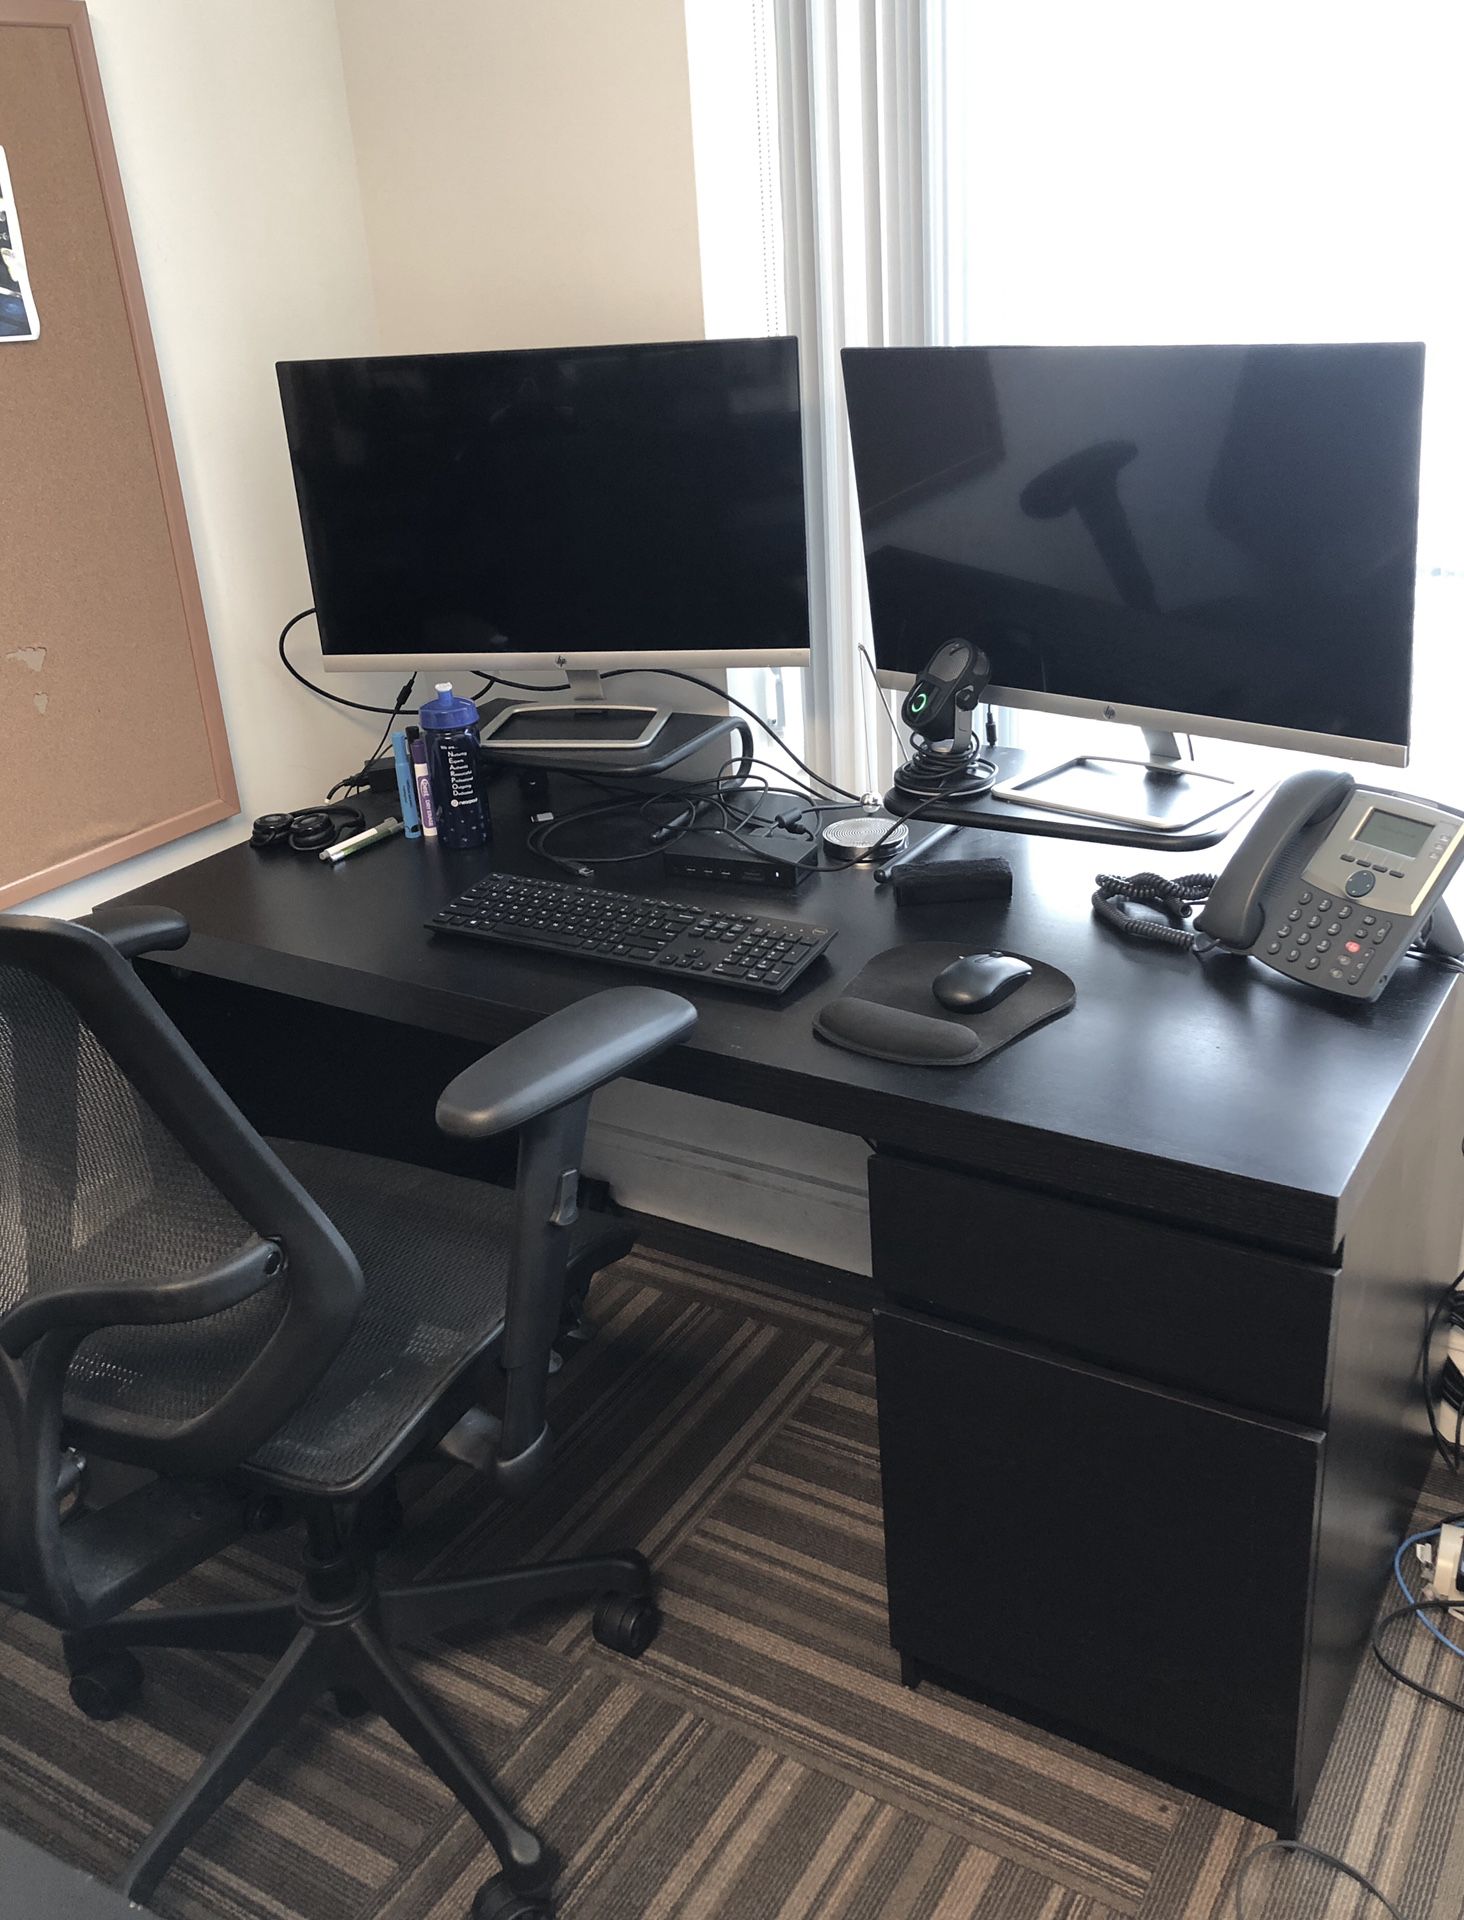 Malm desk ikea + chair for extra $30